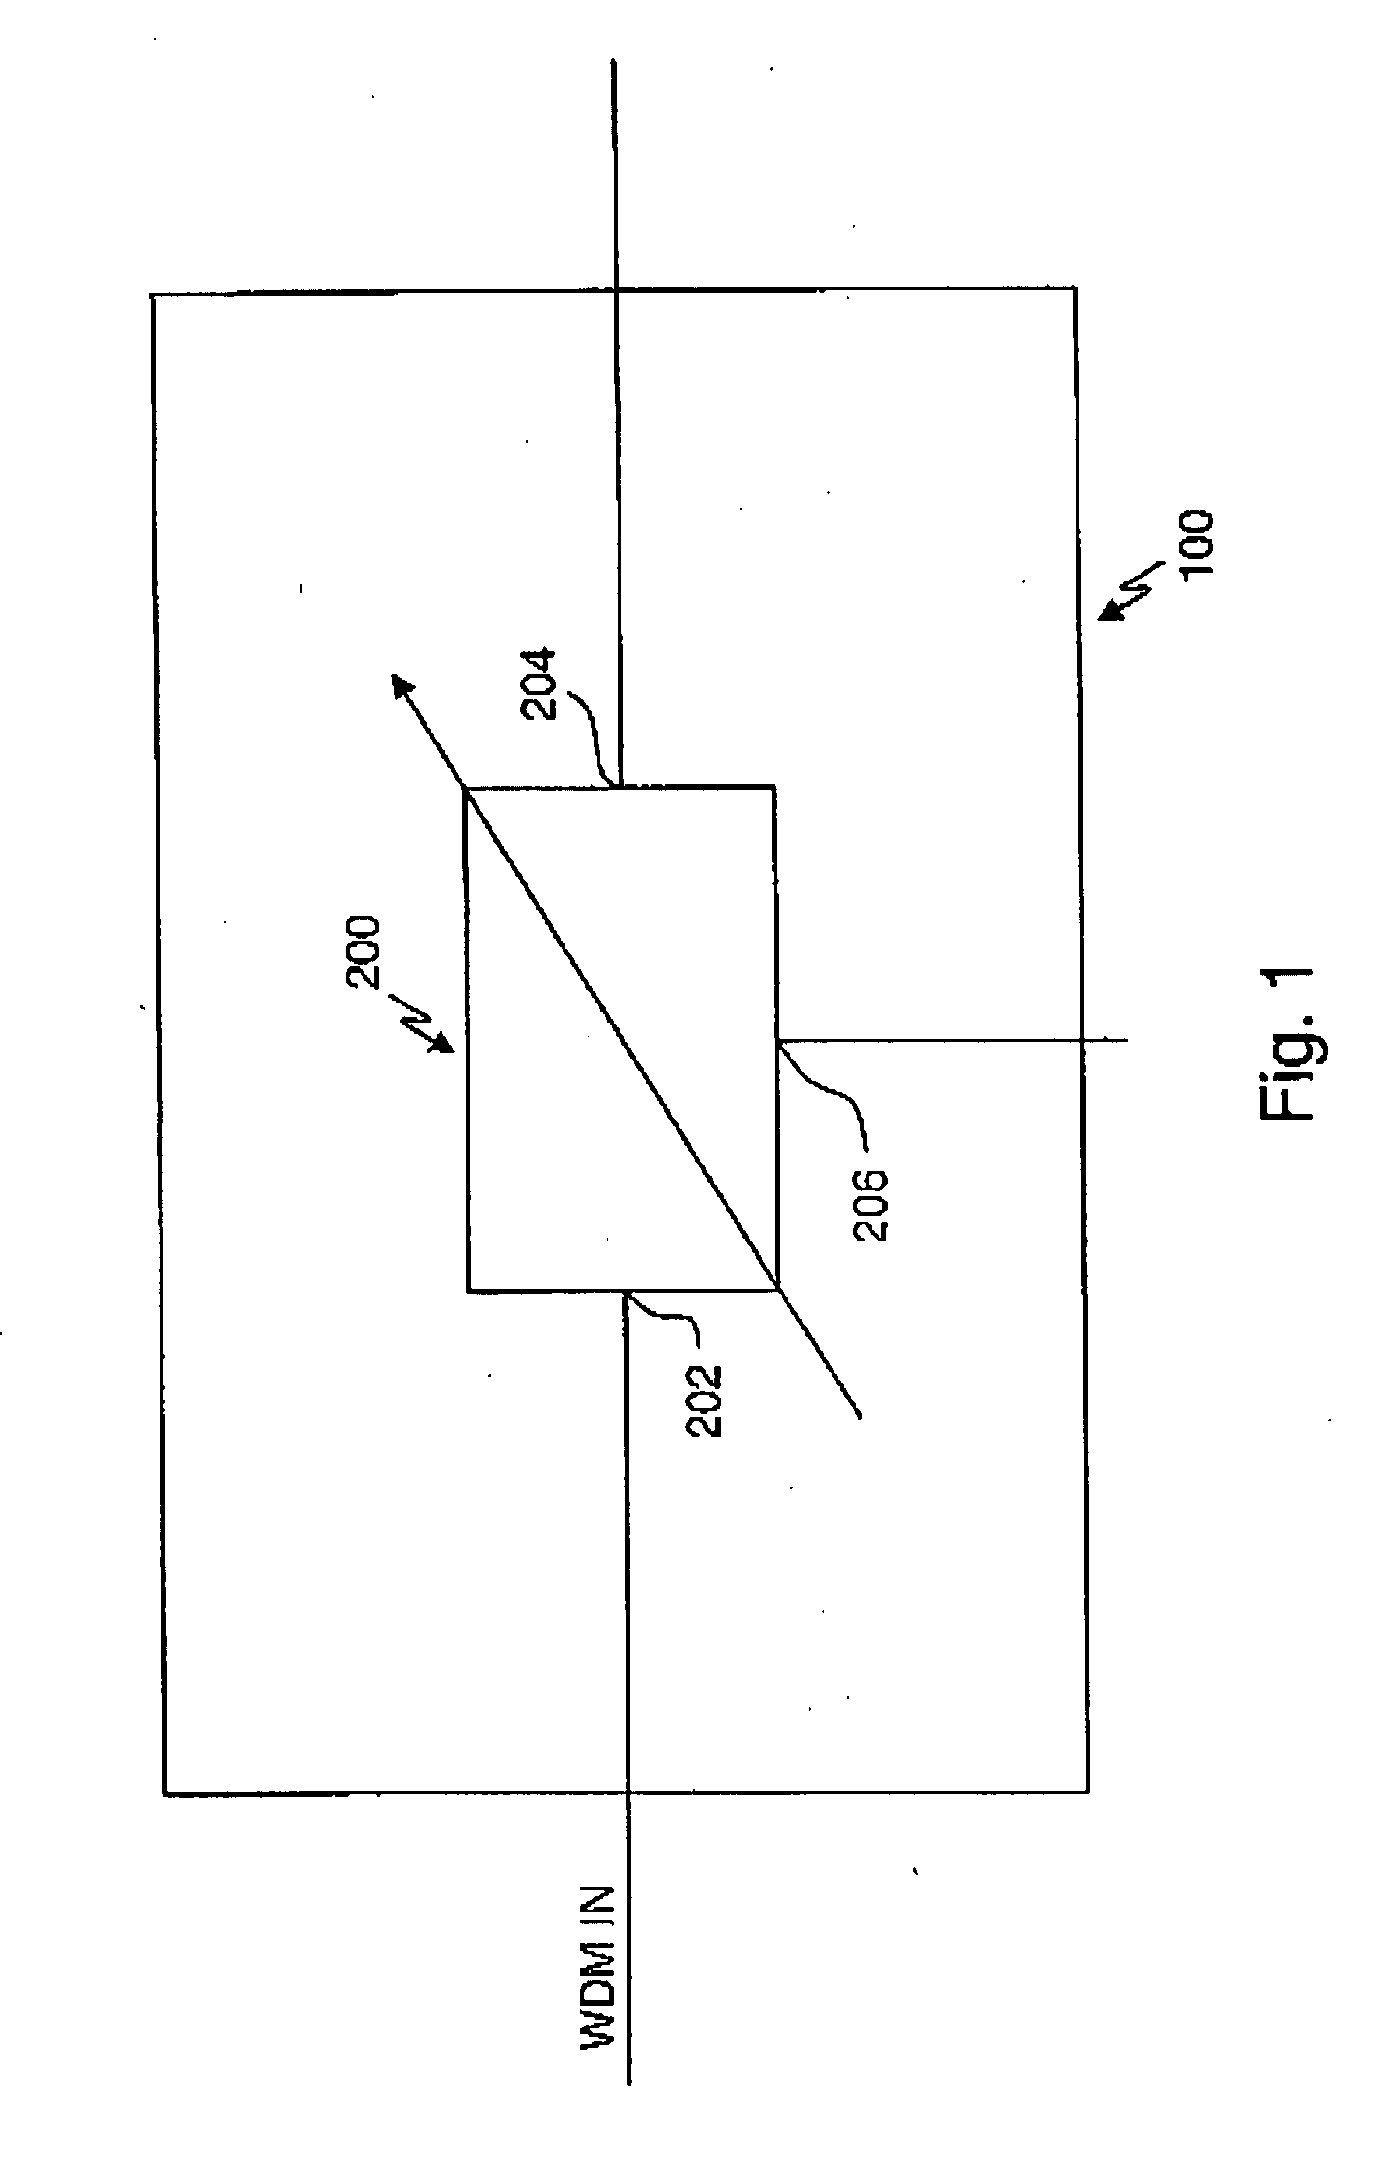 Wavelength division multiplexed optical communication system with rapidly-tunable optical filters